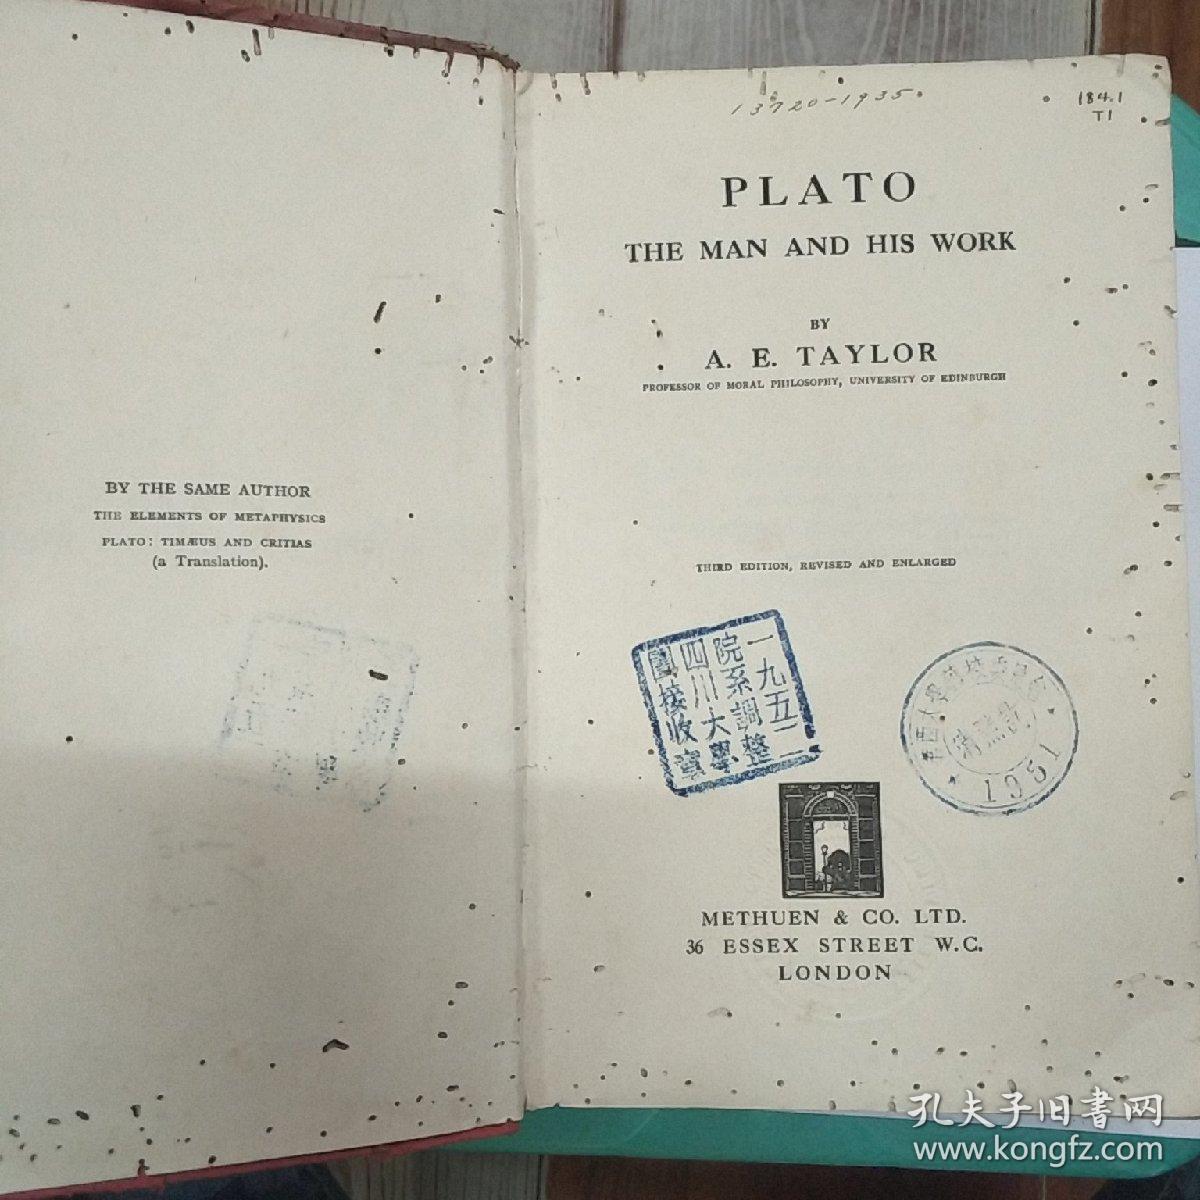 PLATO THE MAN AND HIS WORK 第三版1929年（V243）